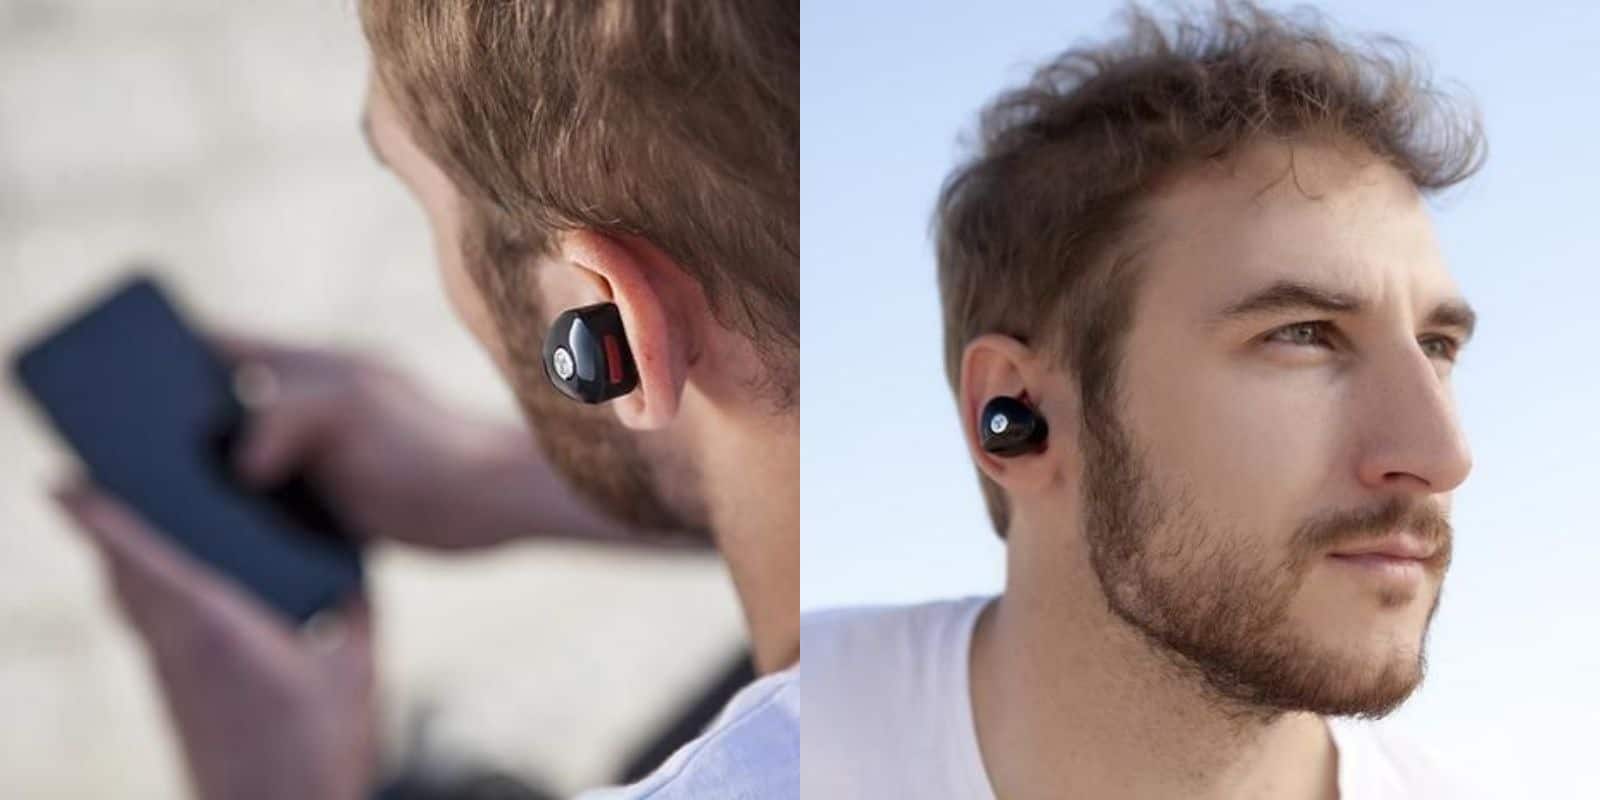 These wireless earbuds are a nice mix of high tech and understated design.